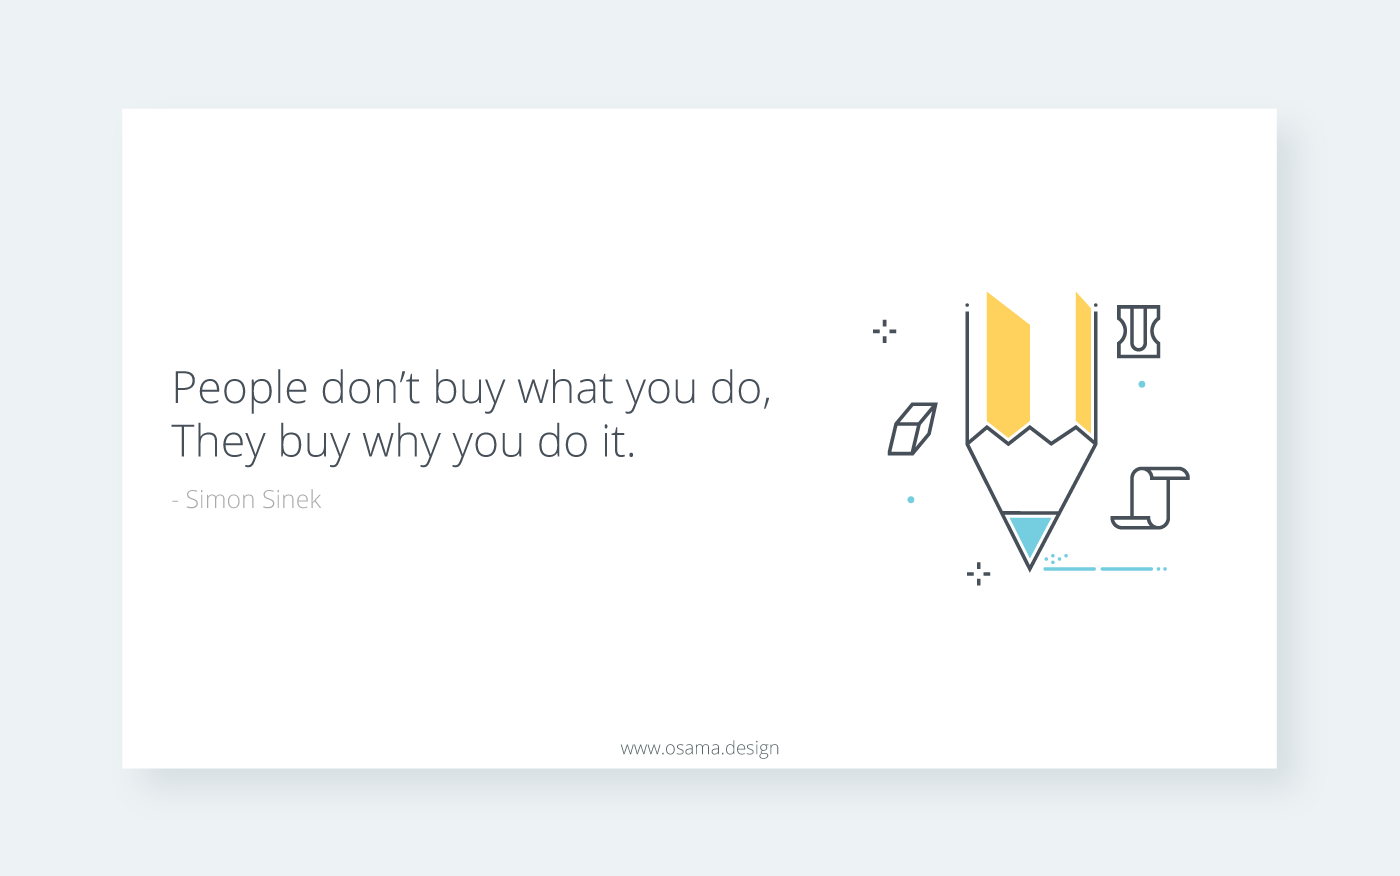 Quotes inspiration Startup ILLUSTRATION  clean flat color